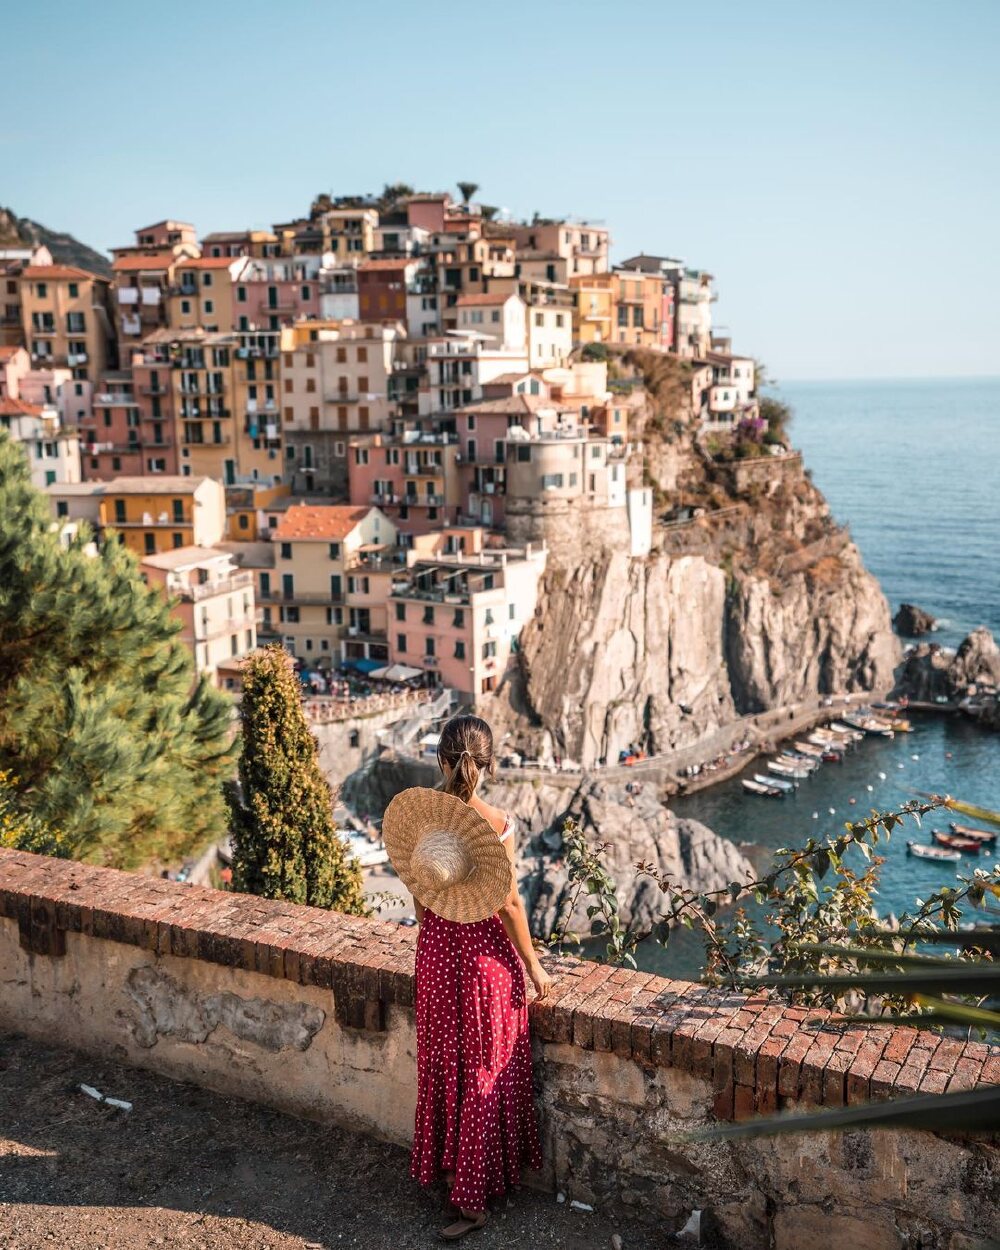 1-Week Itinerary in Cinque Terre, Italy